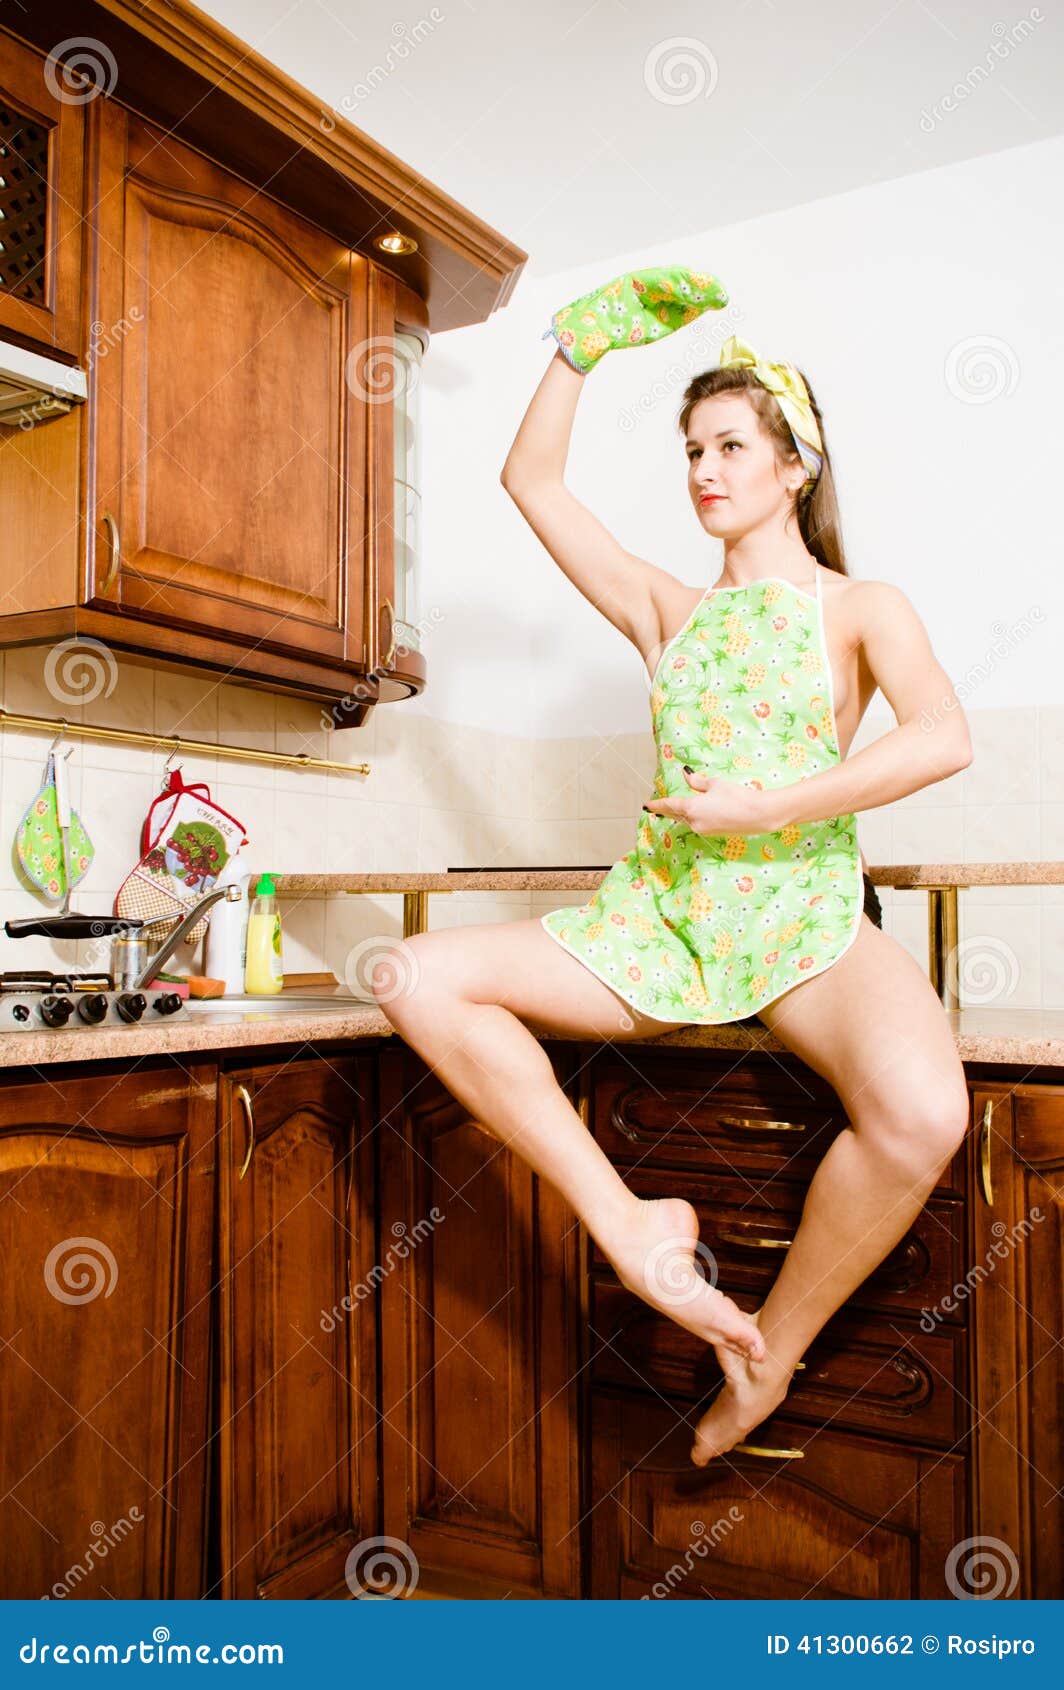 Dancing Girl Sitting On The Table In The Kitchen Apron